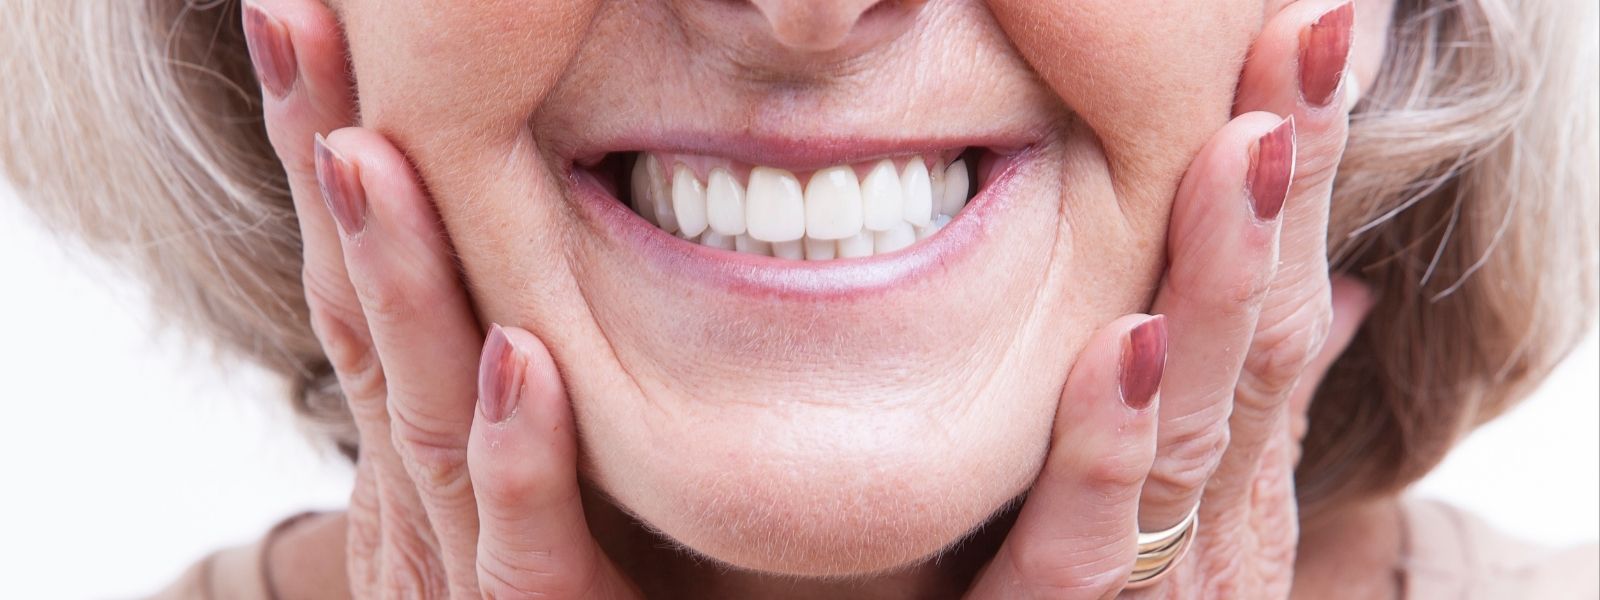 A lady smiling wearing partial Dentures